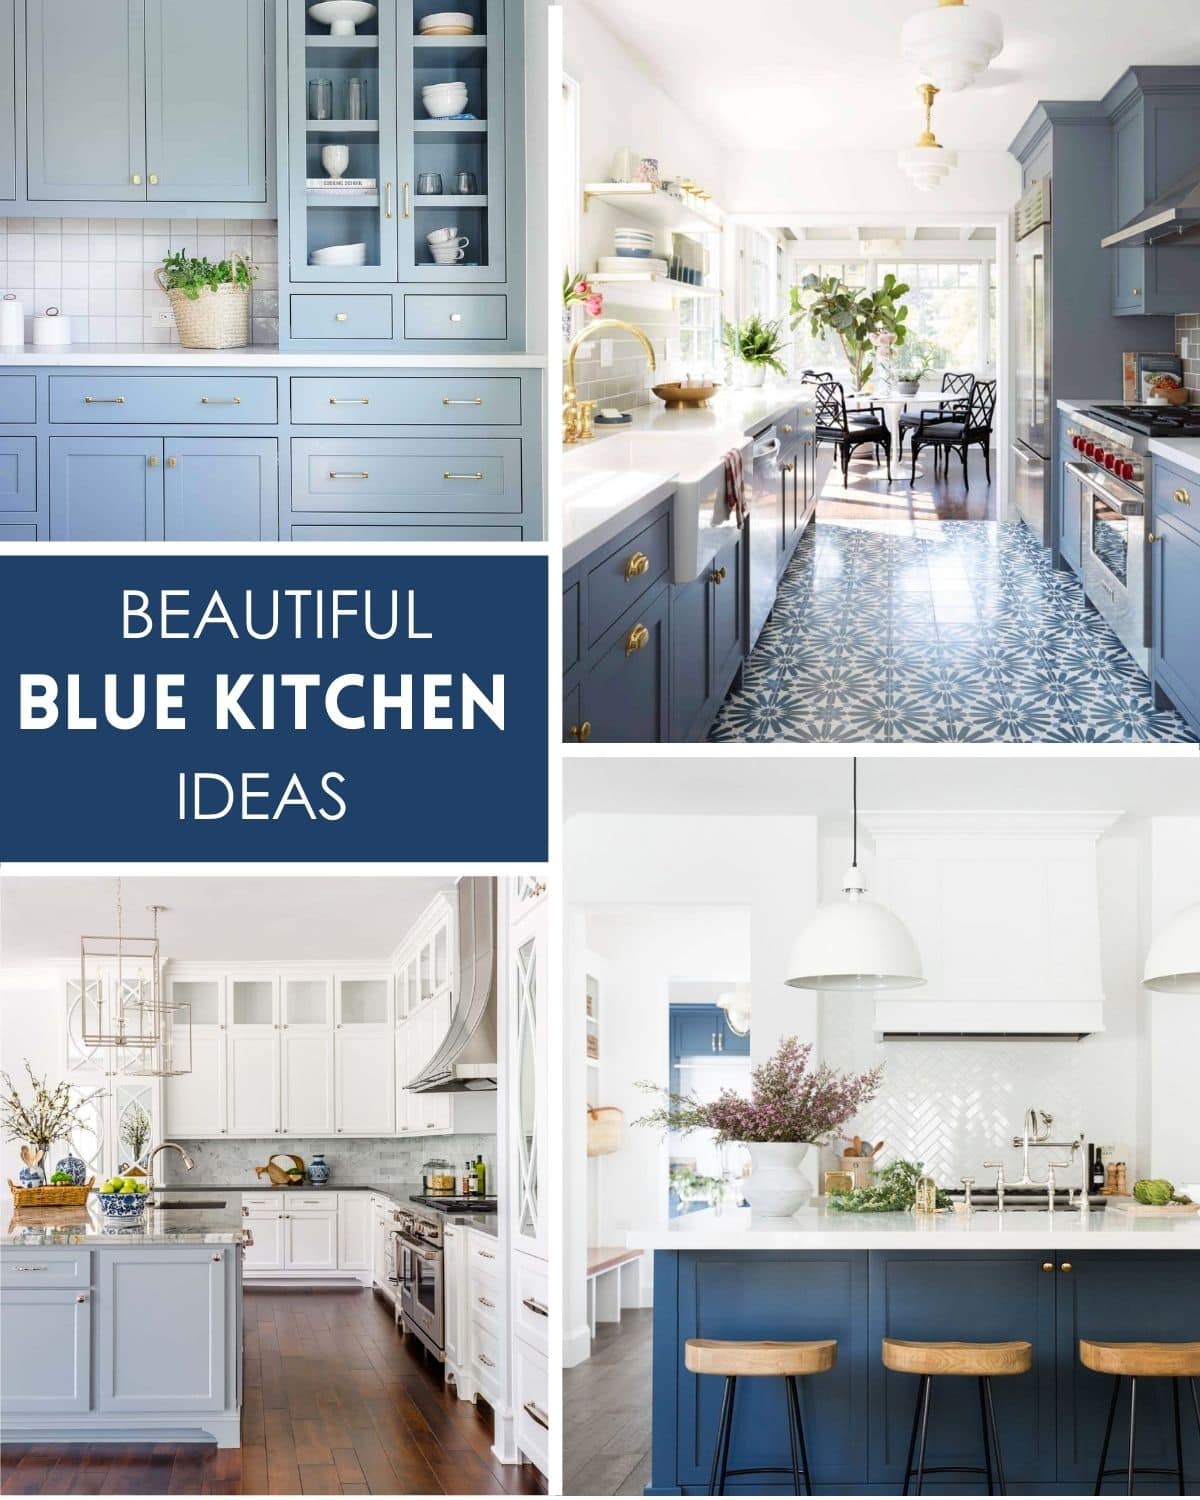 20 Blue Kitchen Ideas You'll Absolutely Love